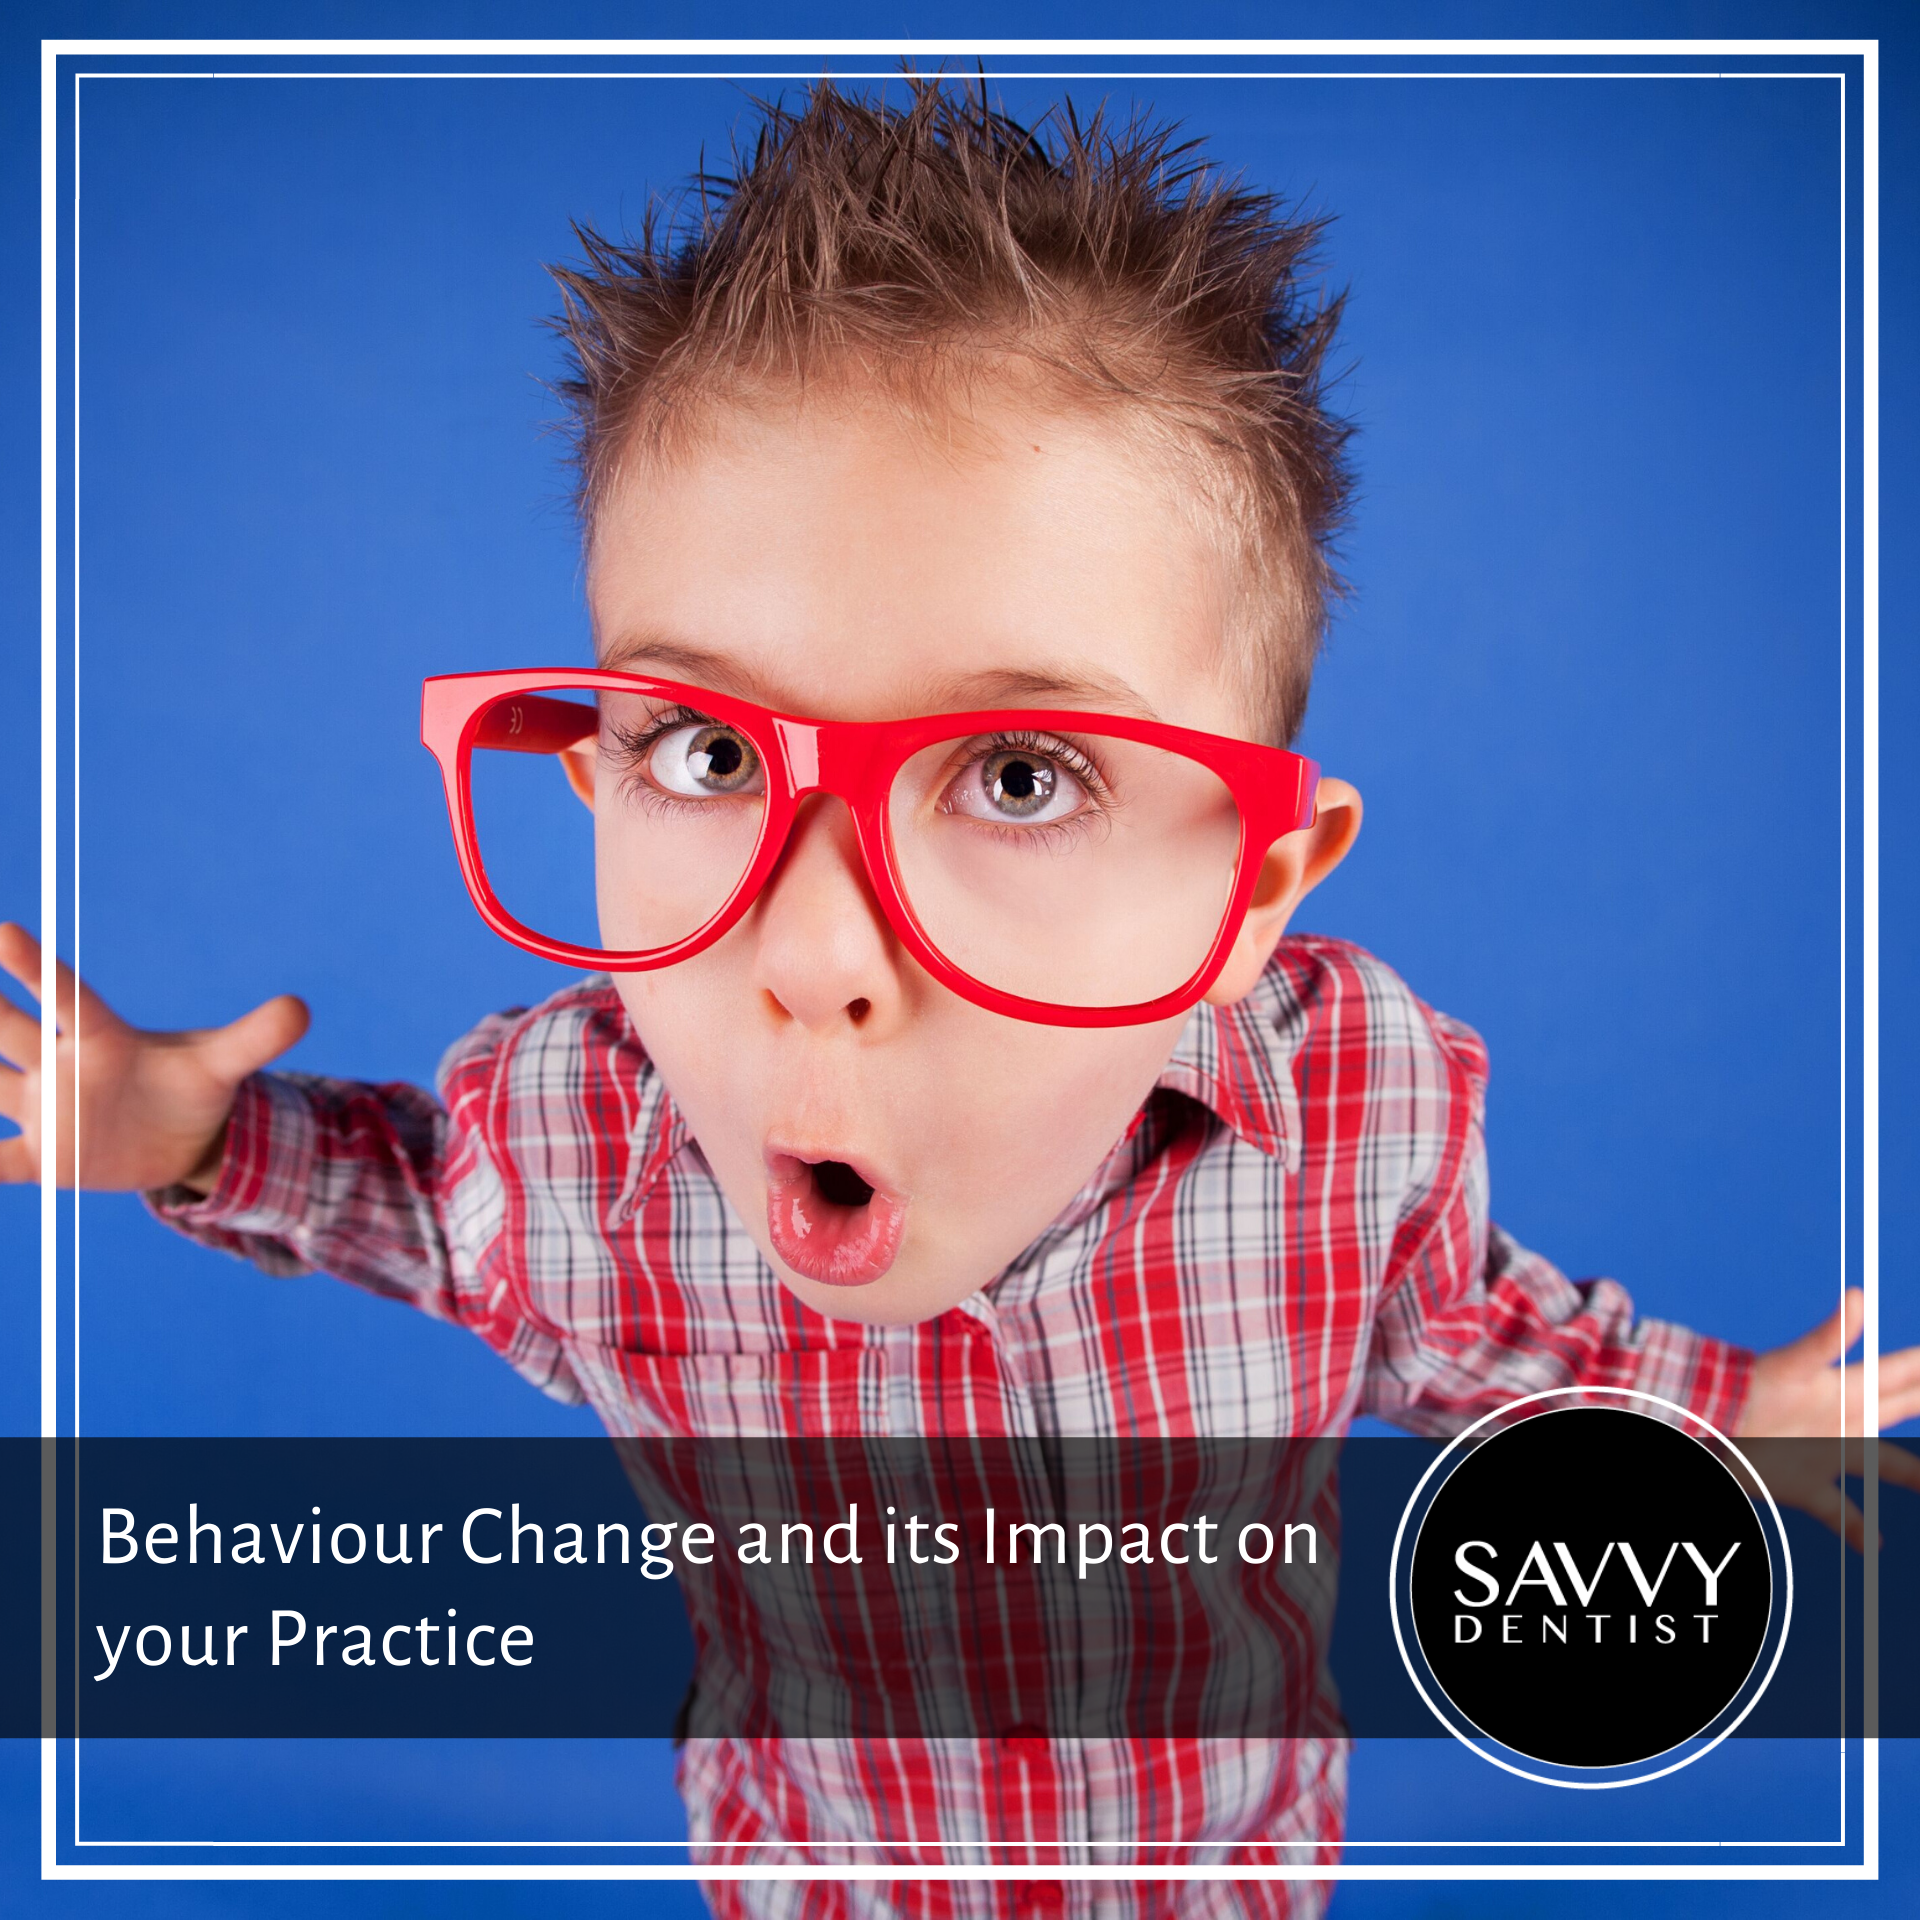 Behaviour Change and Its Impact on Your Practice